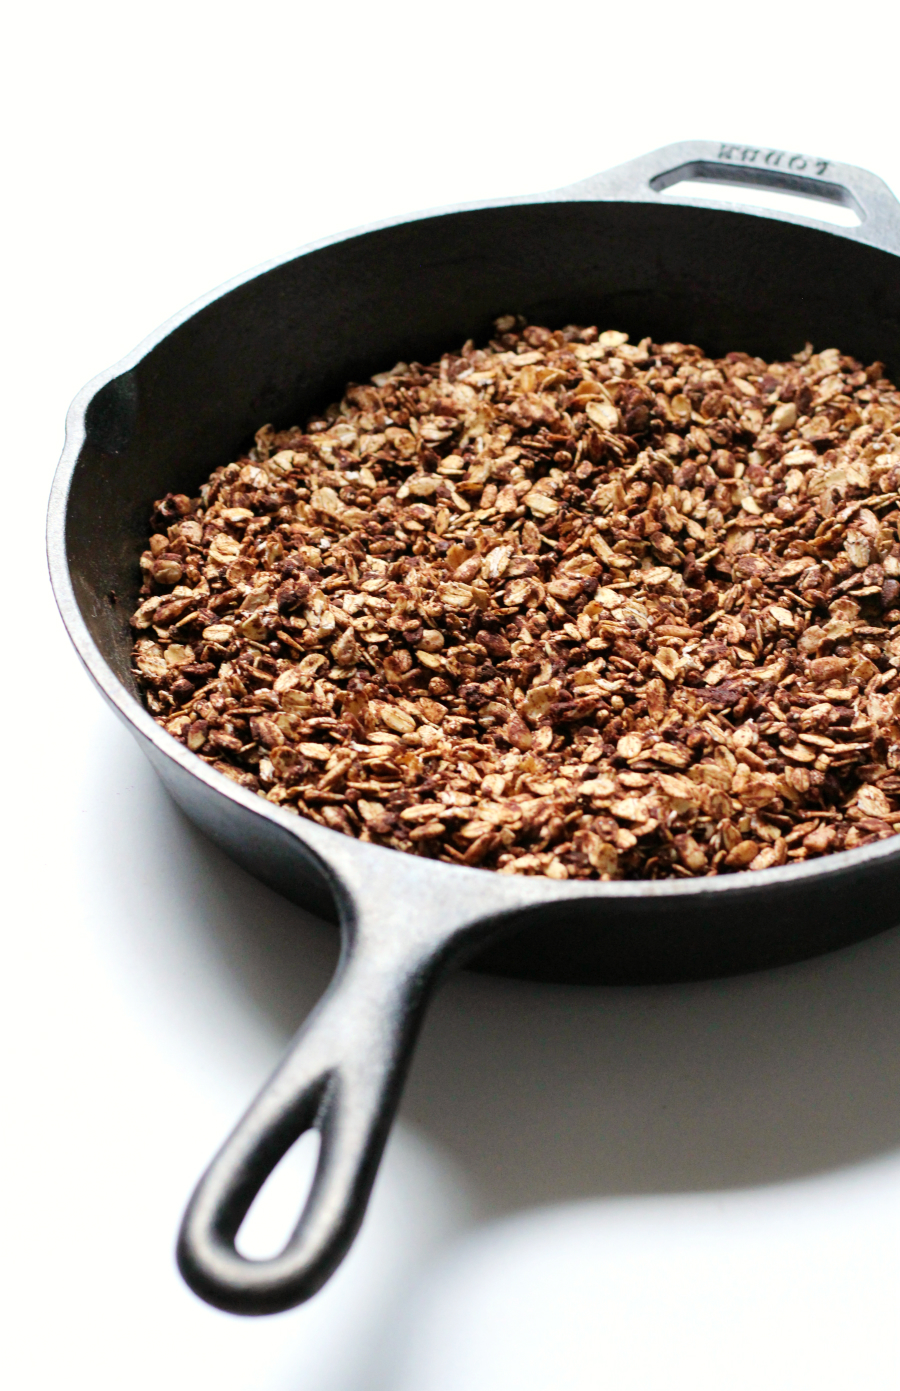 Mint Chocolate Skillet Granola | Strength and Sunshine @RebeccaGF666 Minty, chocolatey, and made right on the stove in the cast iron skillet! A Mint Chocolate Skillet Granola recipe that's gluten-free, vegan, nut-free, and allergy-free! Perfect for breakfast, as a snack, or dessert topping!